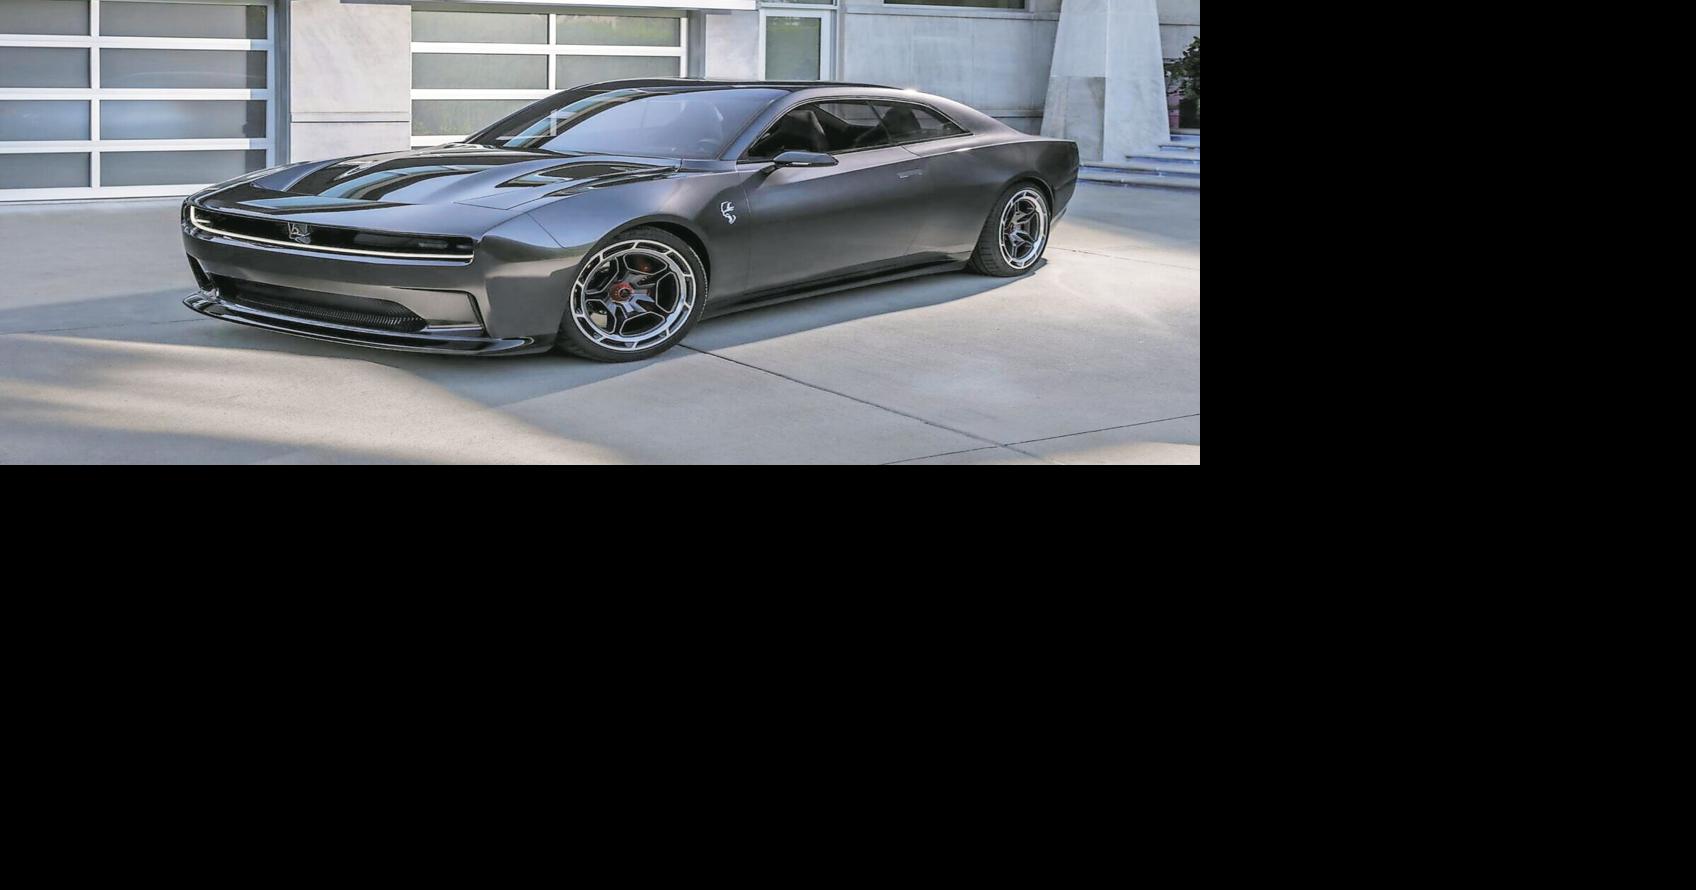 Dodge Charger Daytona SRT Concept The Electric Muscle Car of 2024 Lifestyle